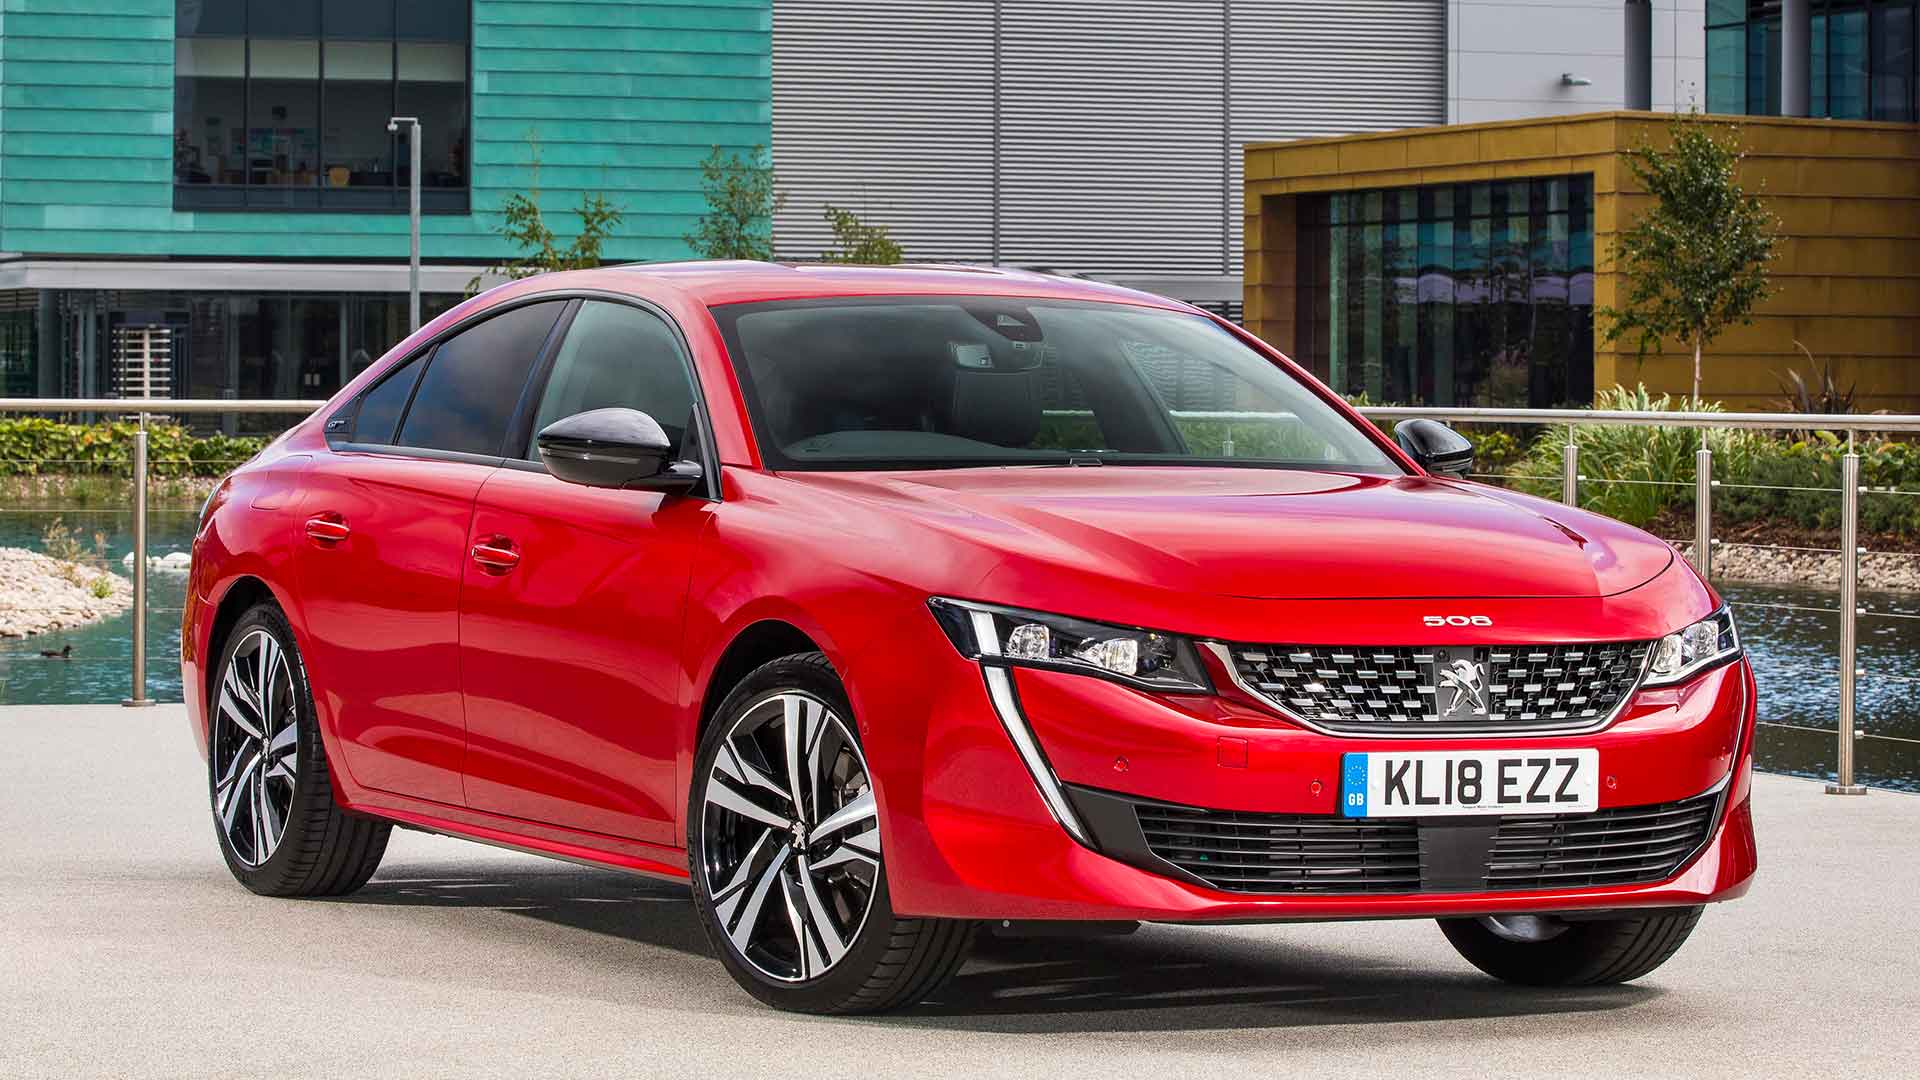 Experts pick the 10 safest new cars of 2019